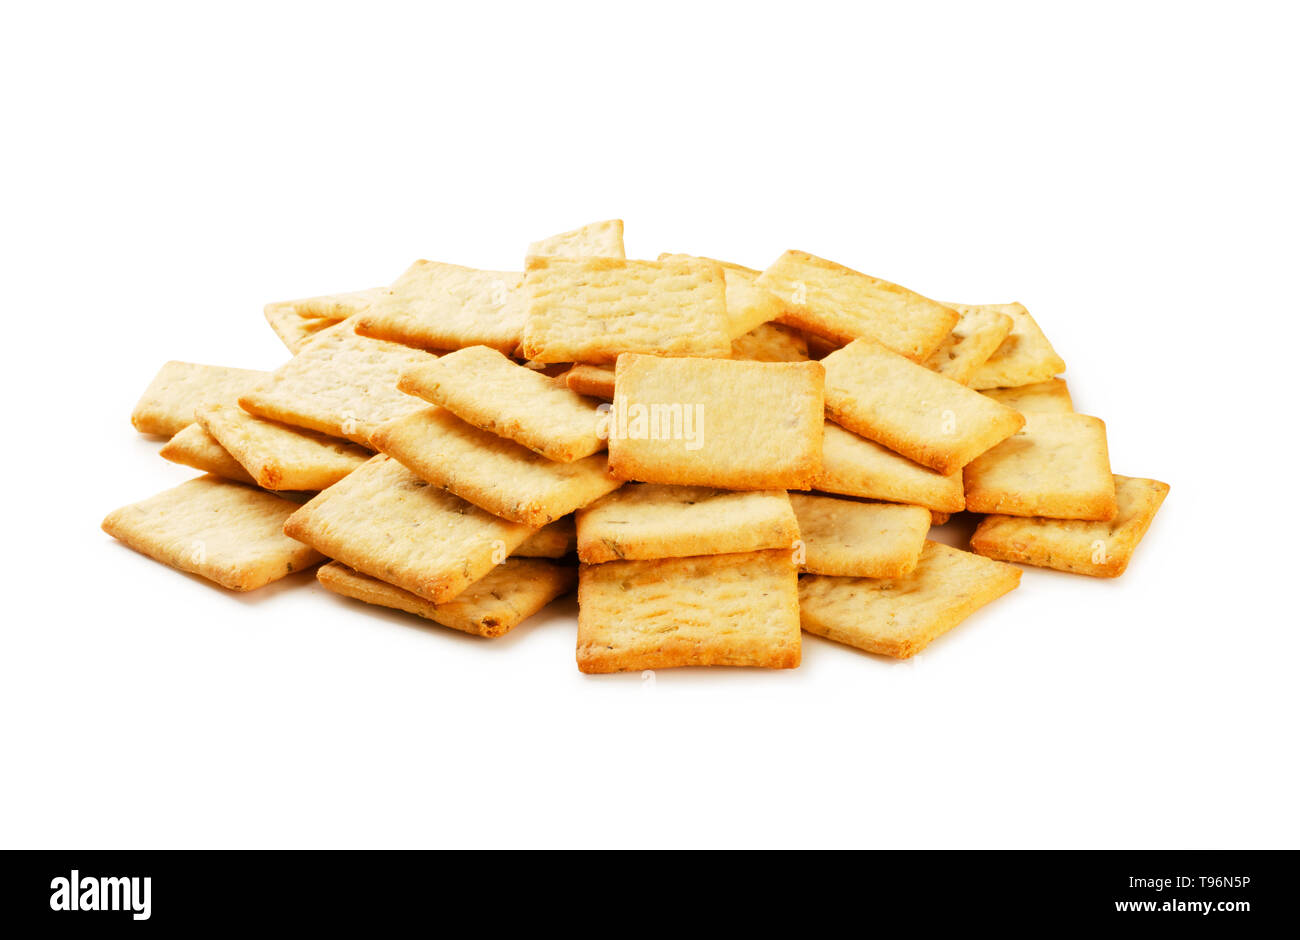 Stack of crackers isolated in white background Stock Photo